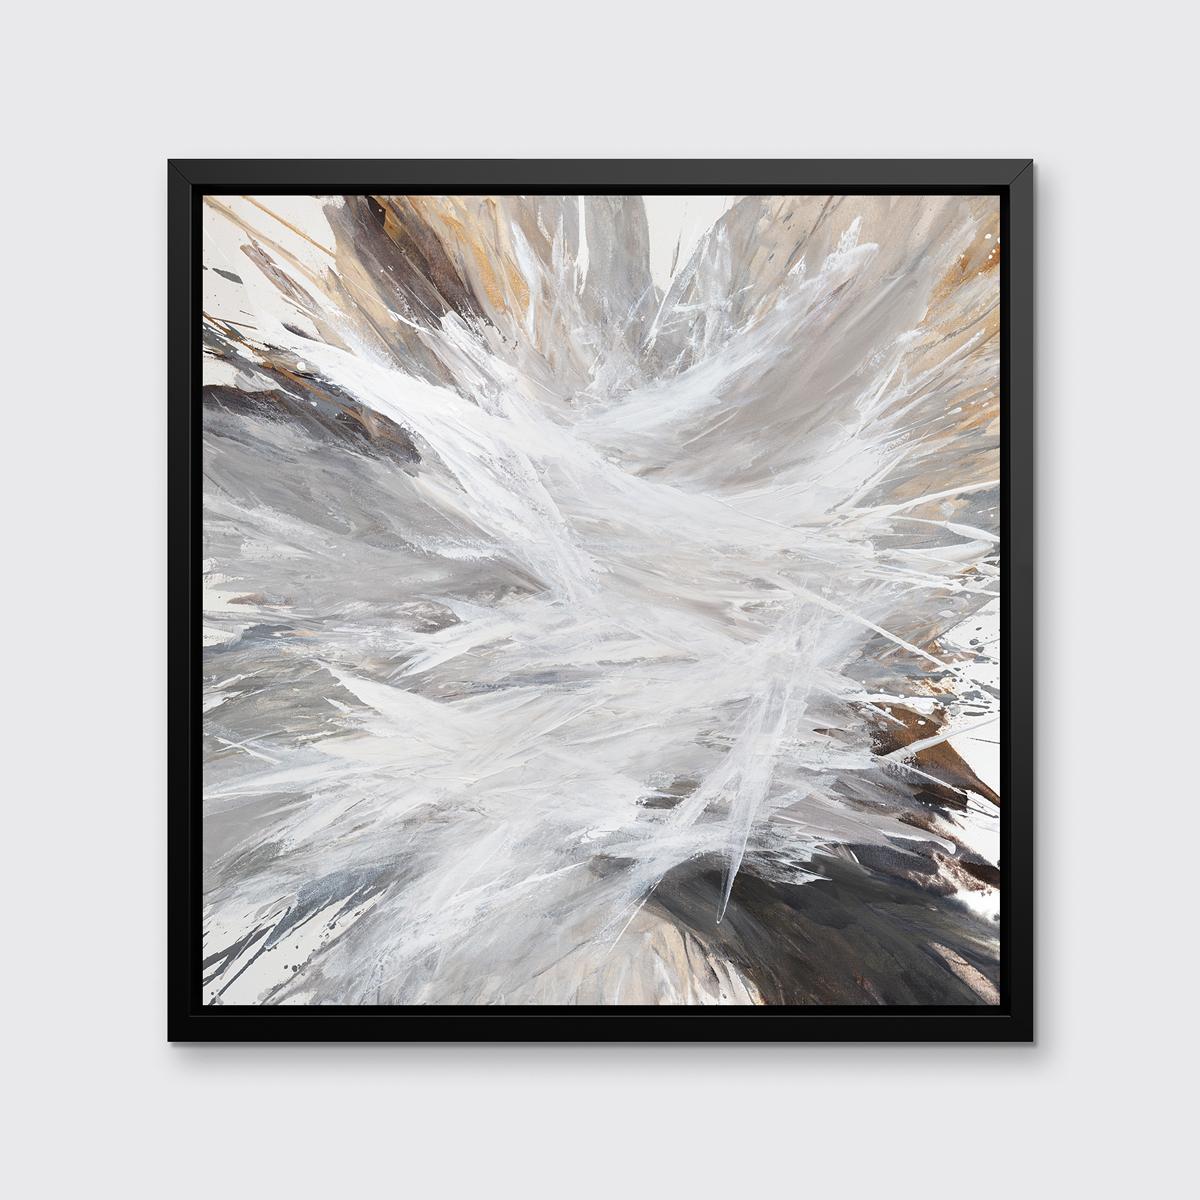 This abstract limited edition print by Teodora Guererra features a warm neutral palette with charcoal and light grey, white, and gold. Broad strokes are layered and move out from the center of the composition with an energetic burst toward the edges